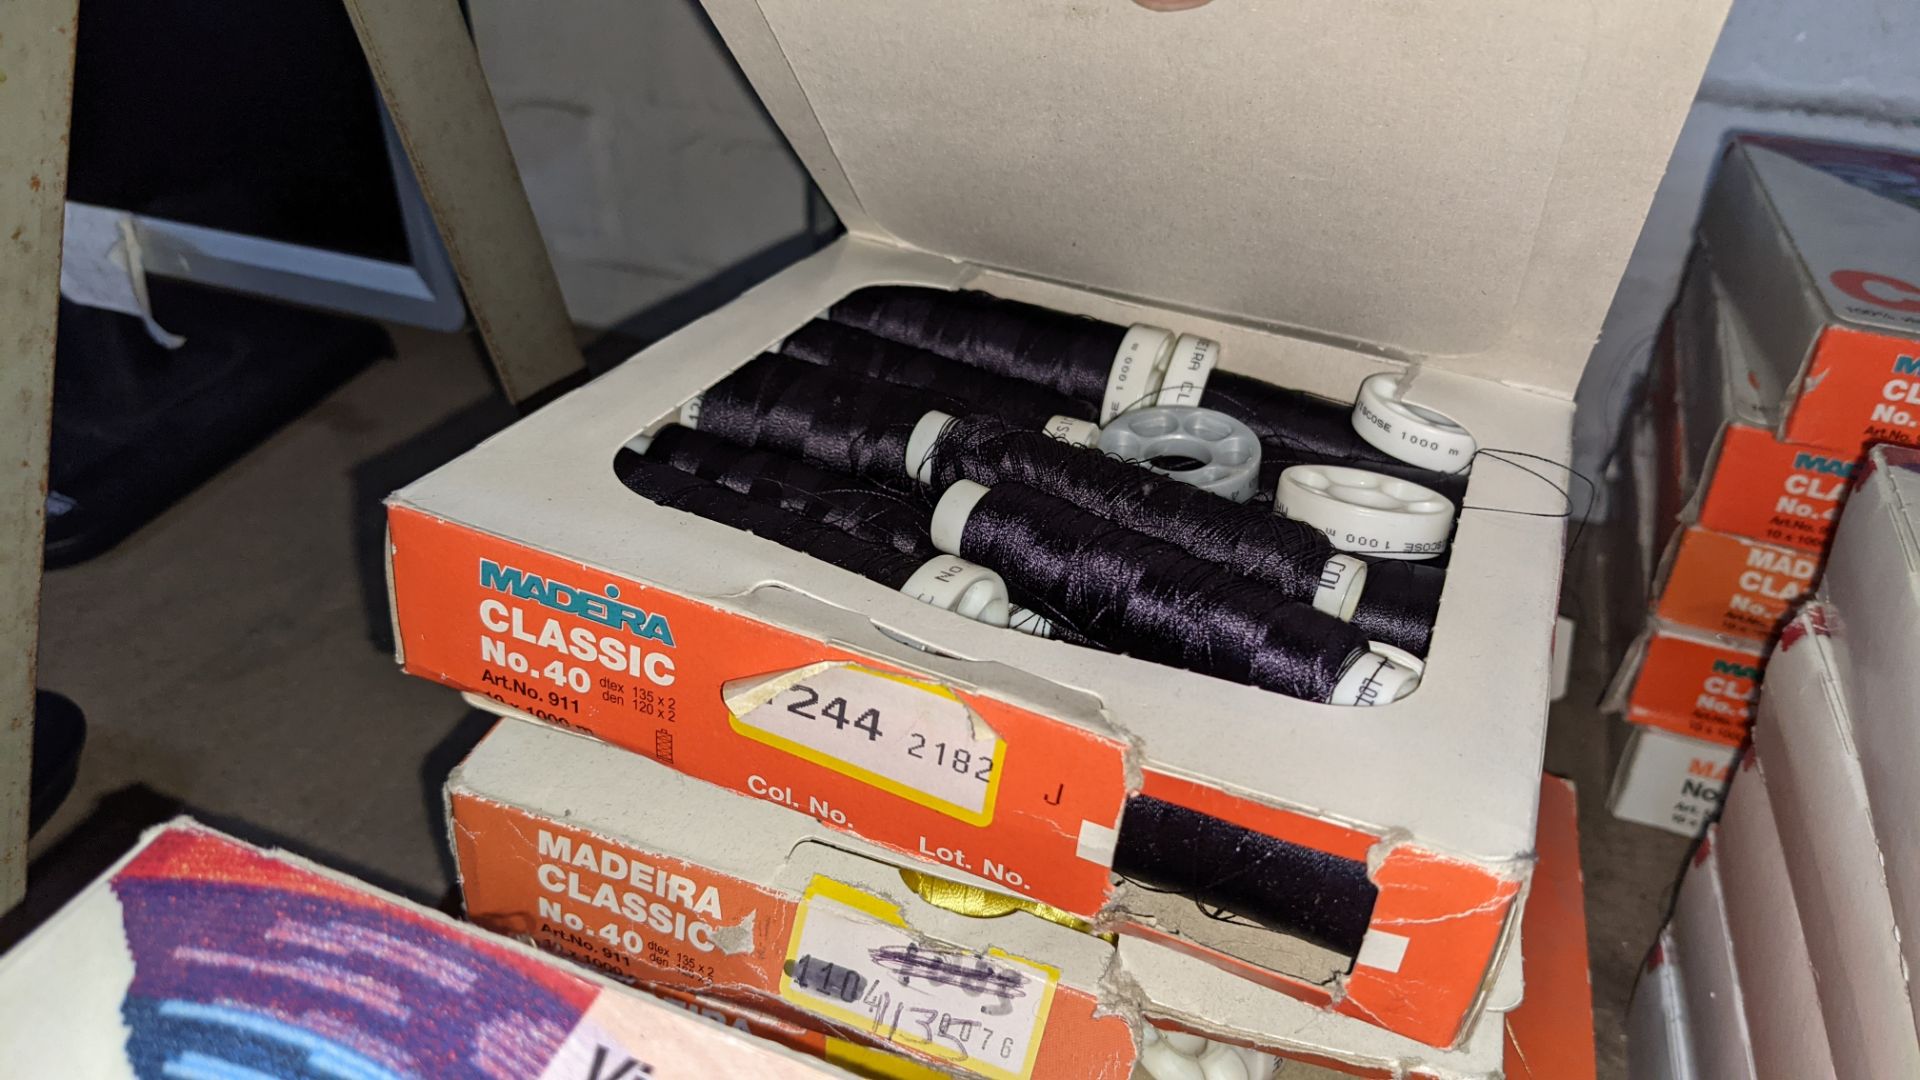 15 assorted boxes of Madeira Classic No. 40 embroidery rayon thread - Image 7 of 8